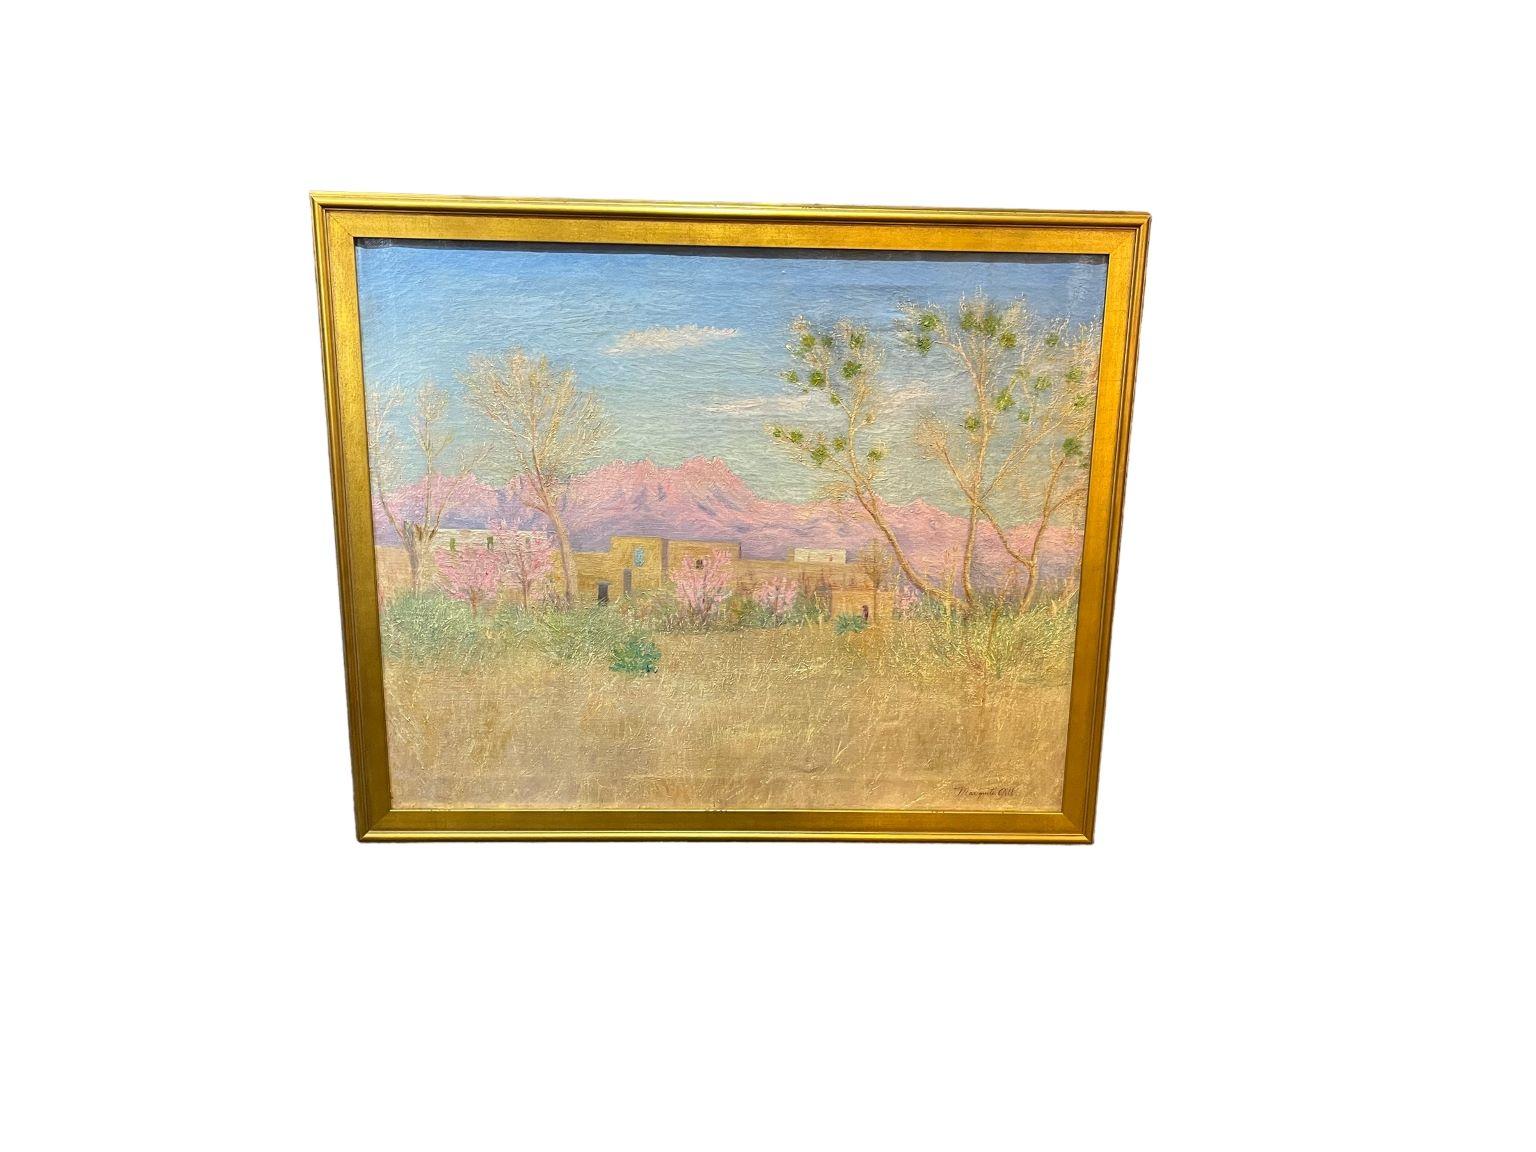 Mariquita Gill Impressionist South Western Painting “Organ Mountains” C.1900’s  